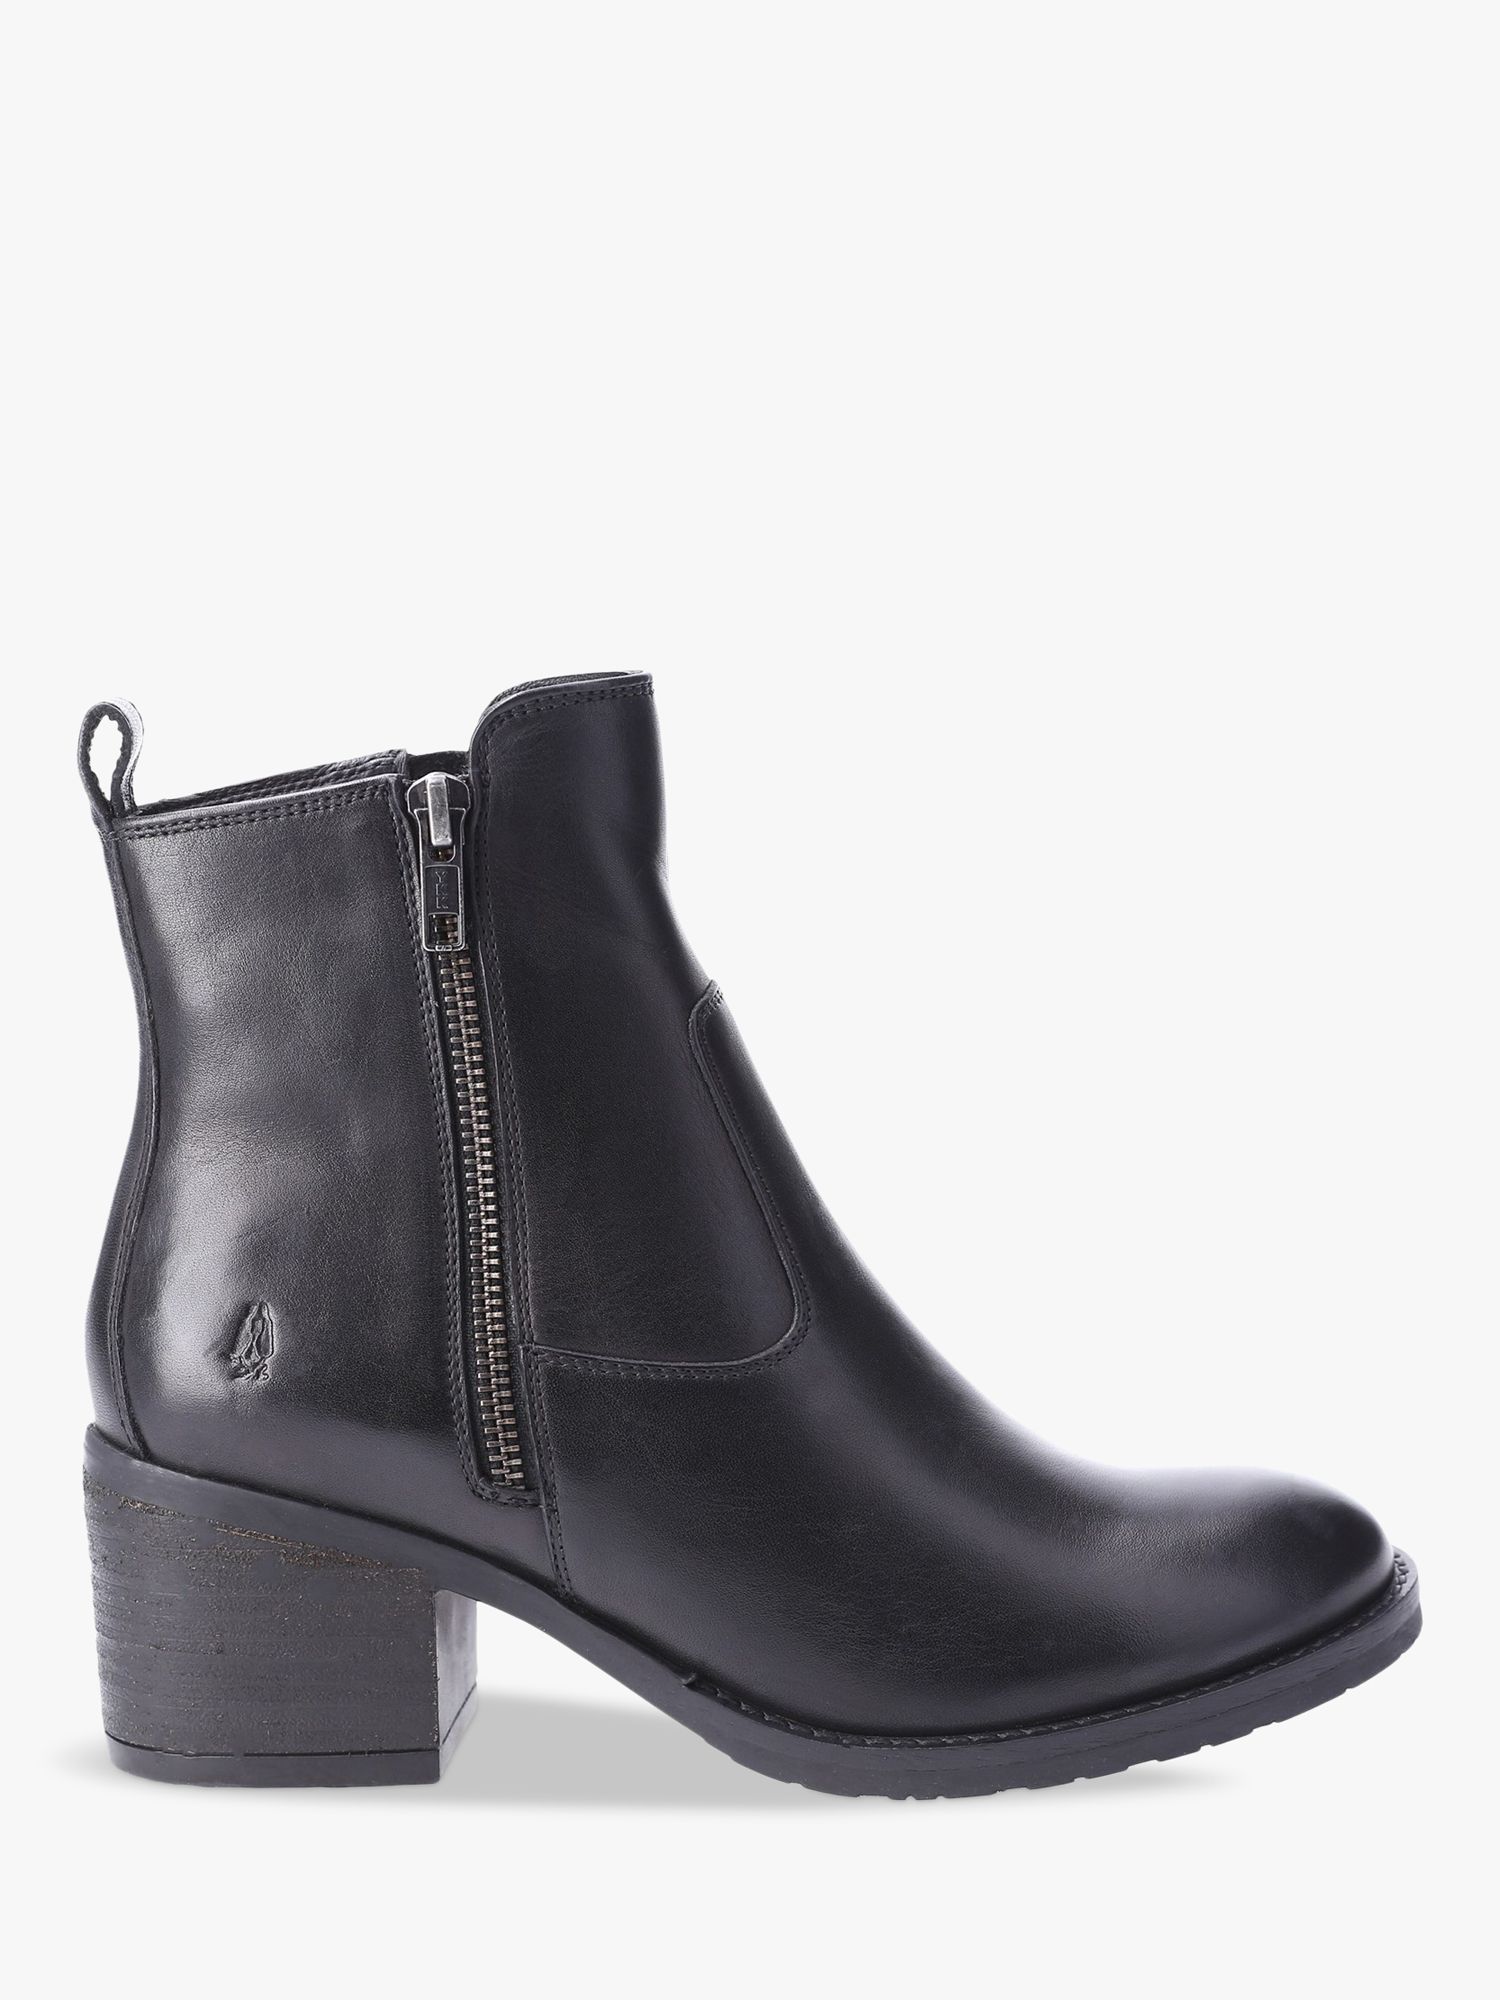 Hush Puppies Helena Leather Block Heel Ankle Boots, Black at John Lewis ...